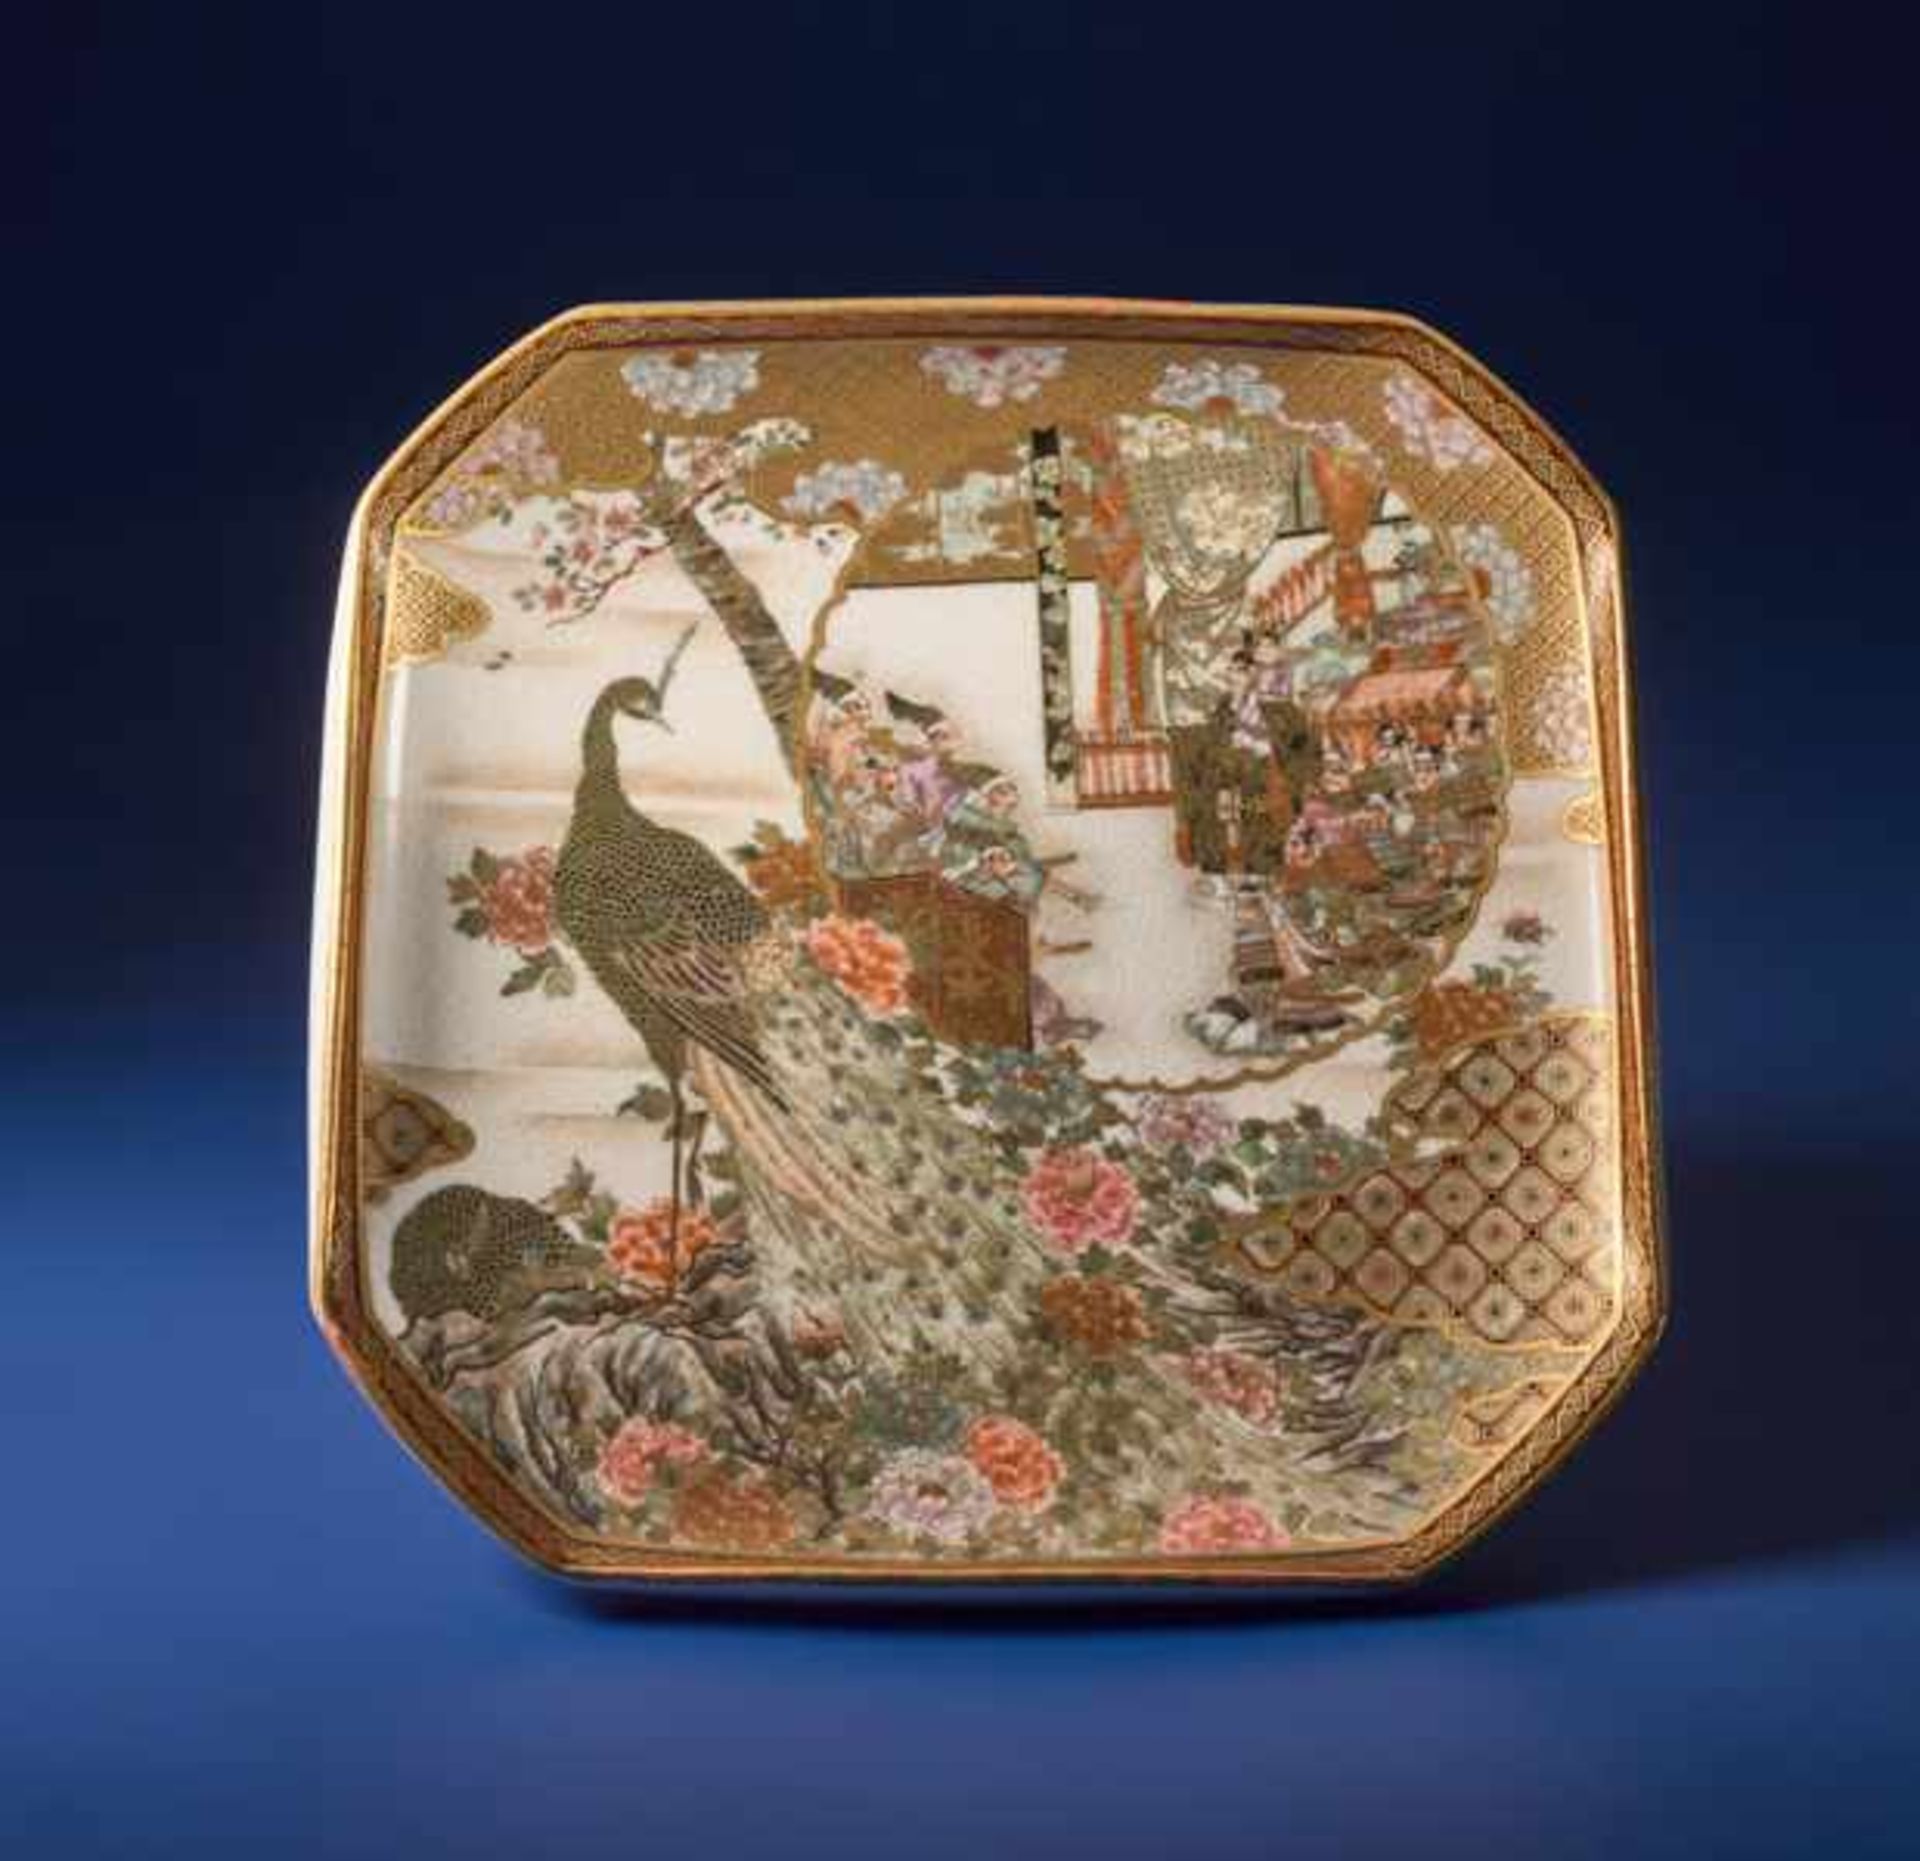 KINZAN: SATSUMA PLATE WITH PEACOCK Glazed ceramic with paint and gold. Japan, Meiji